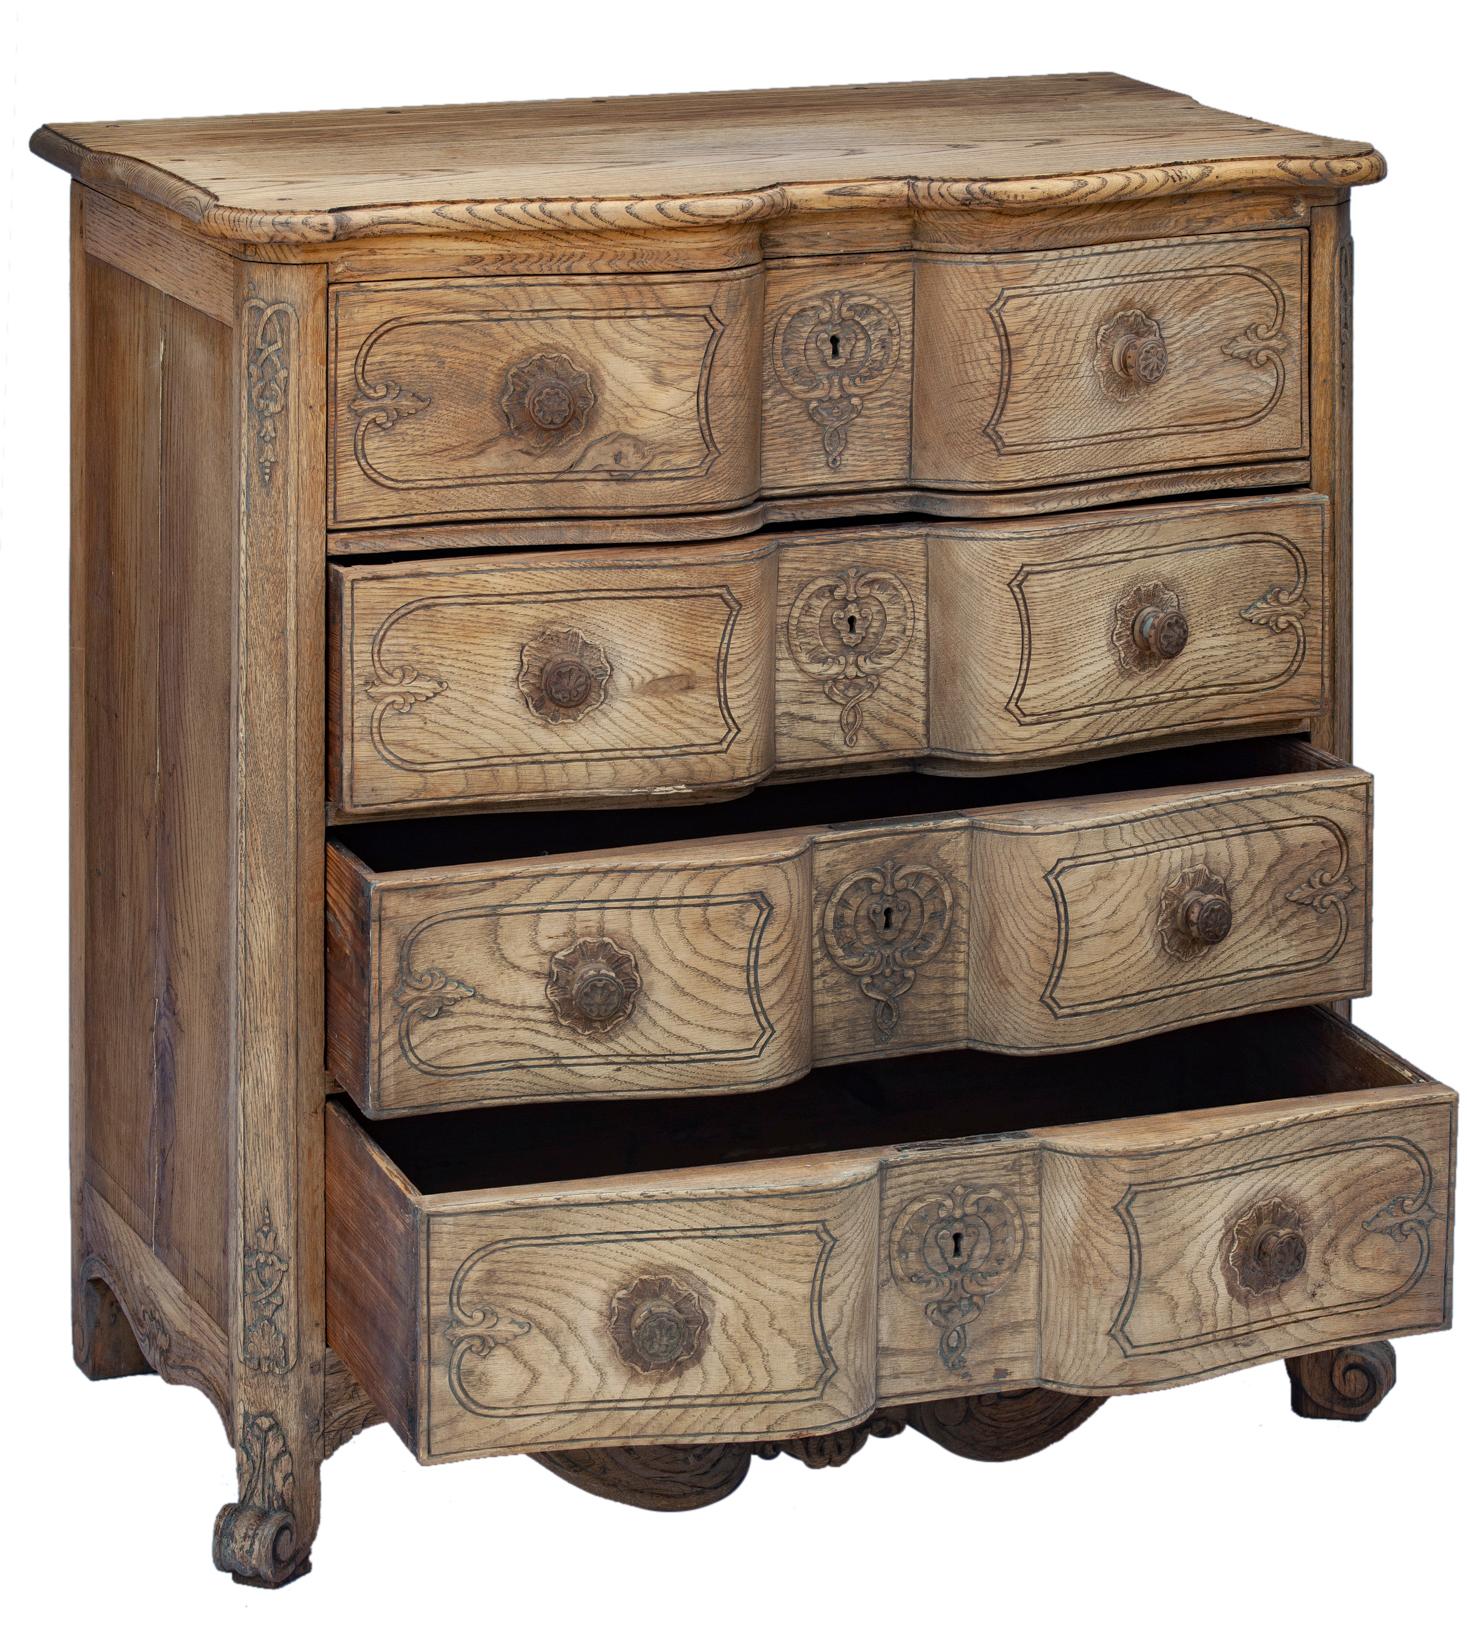 Late 19th C early 20th C. hand carved French Oak Provincial serpentine four drawer chest. The drawers are deep & spacious. 
Graceful serpentine profile with shell motif & ornate cabriole front feet.
Bleached & restored with a super smooth